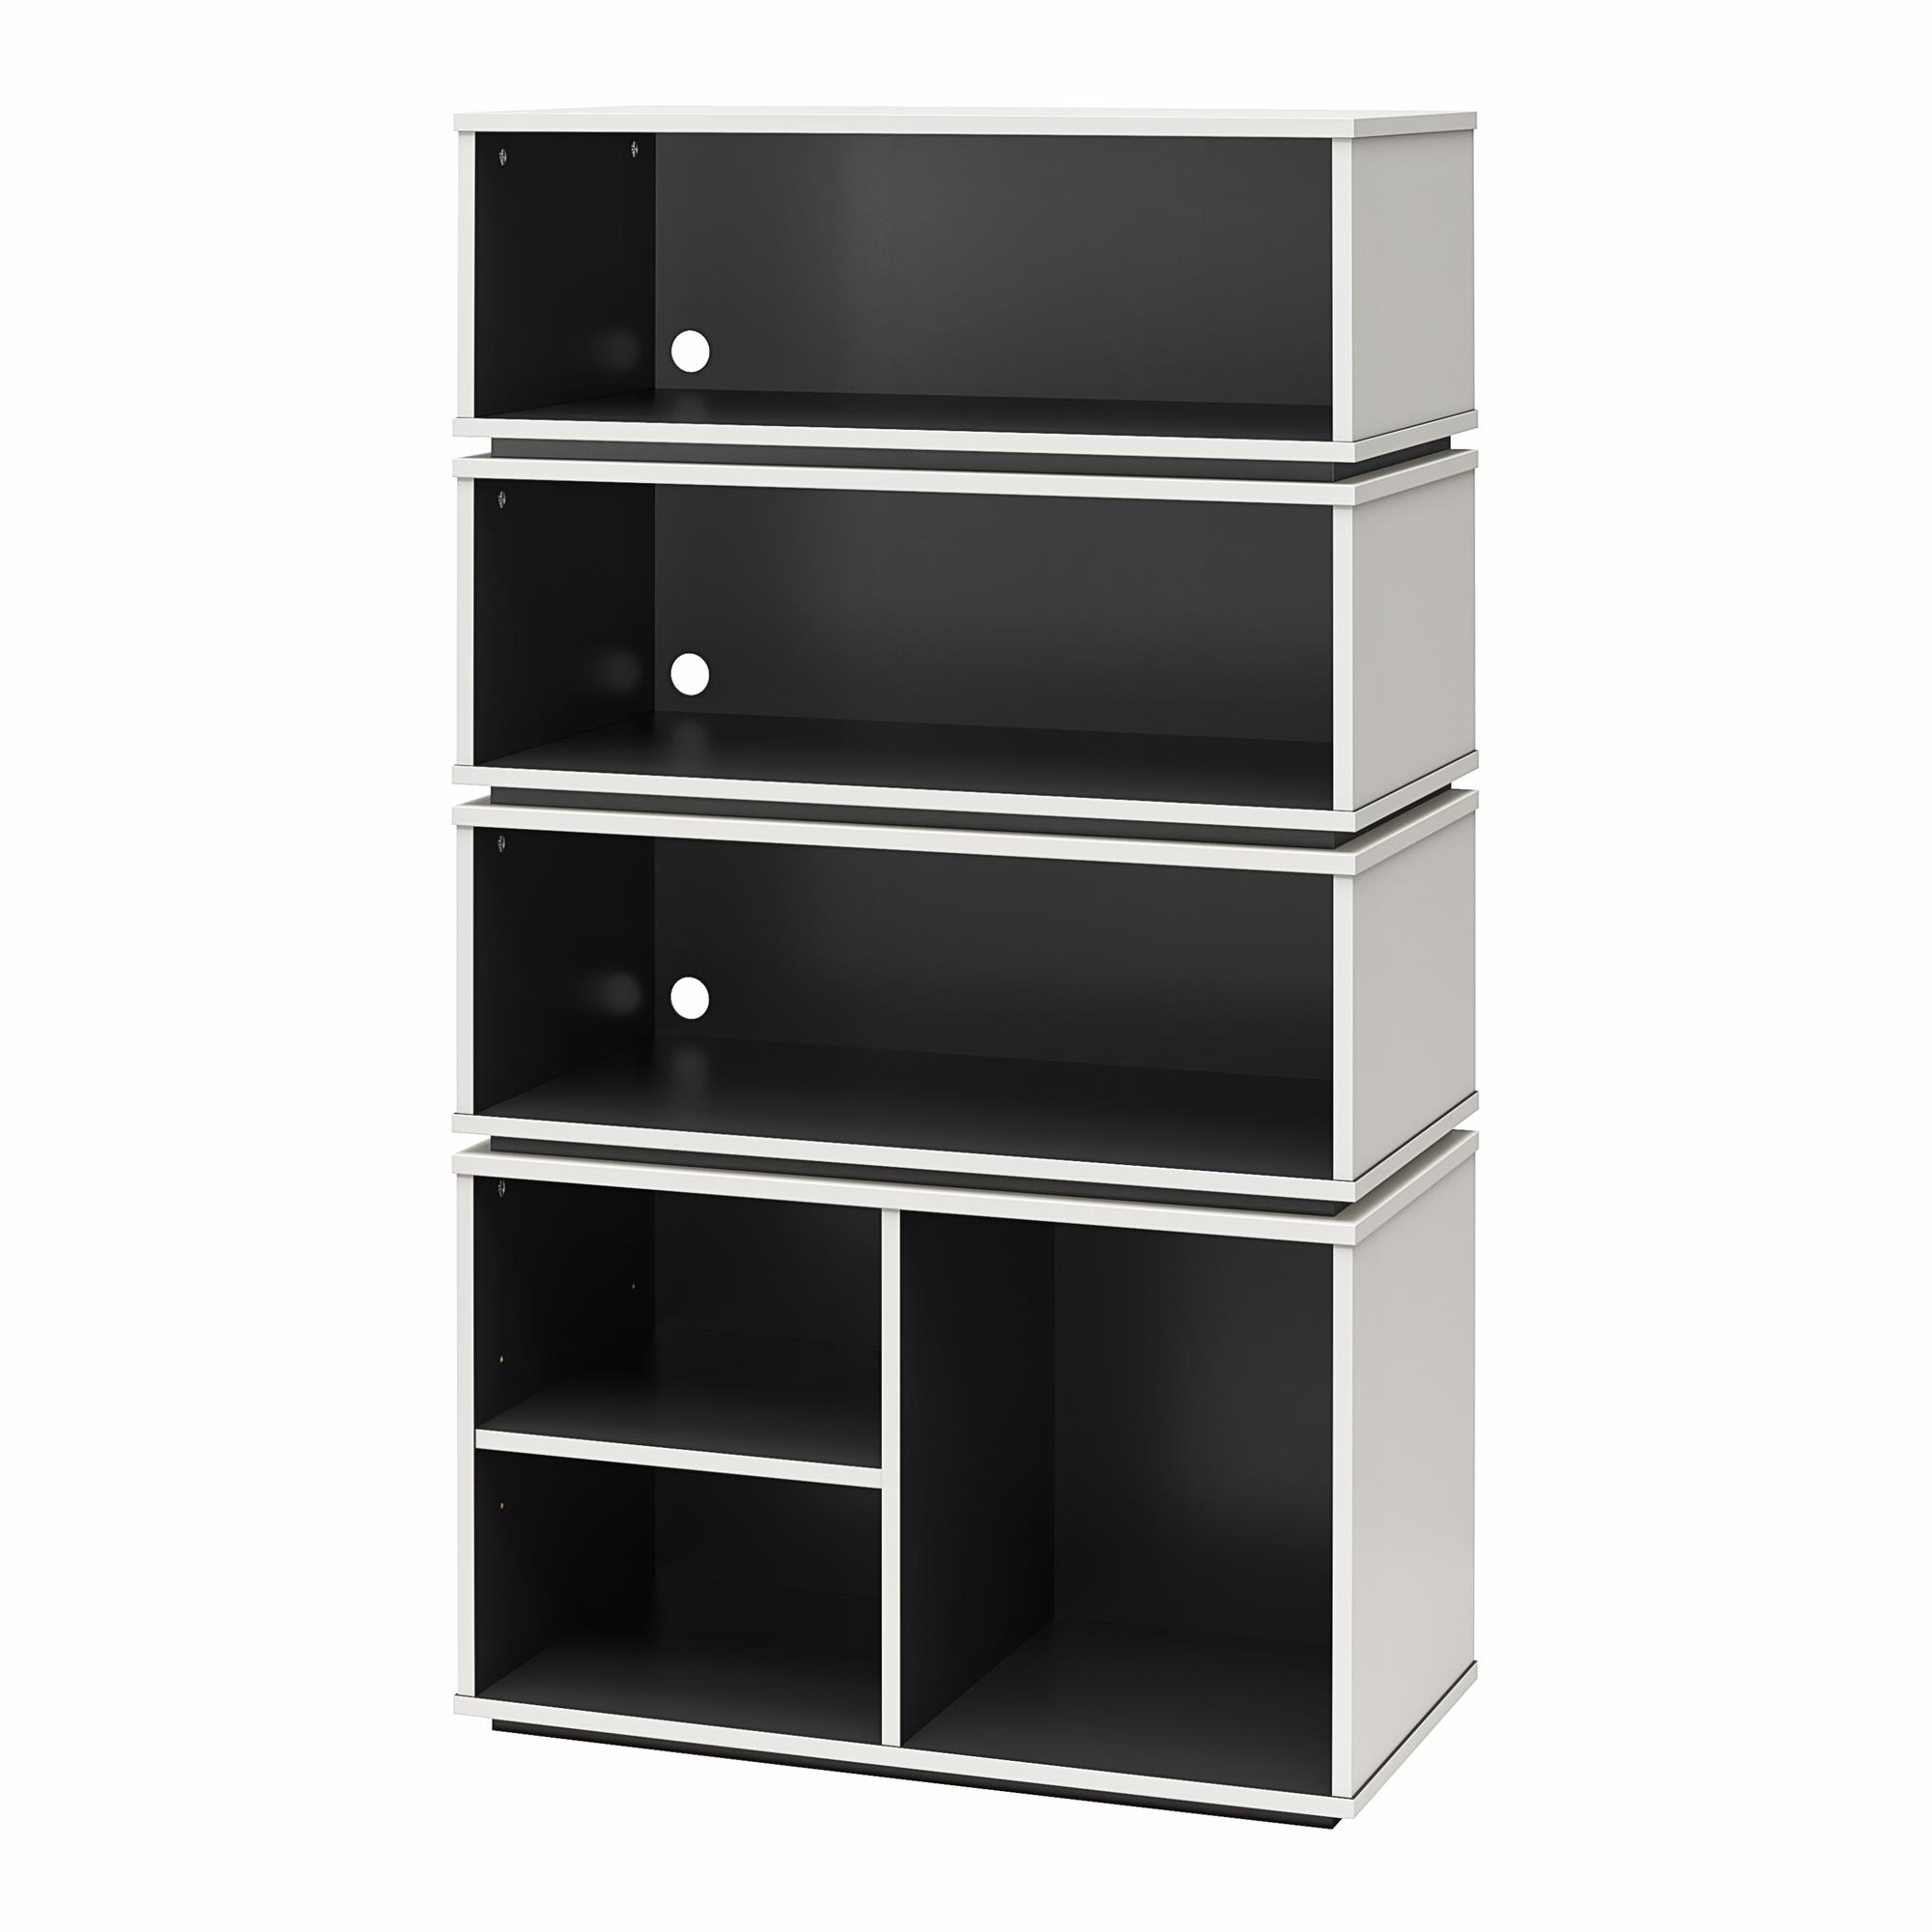 NTense Eclipse Gaming & Collectable Display Storage Bookcase, White and Charcoal - image 5 of 15